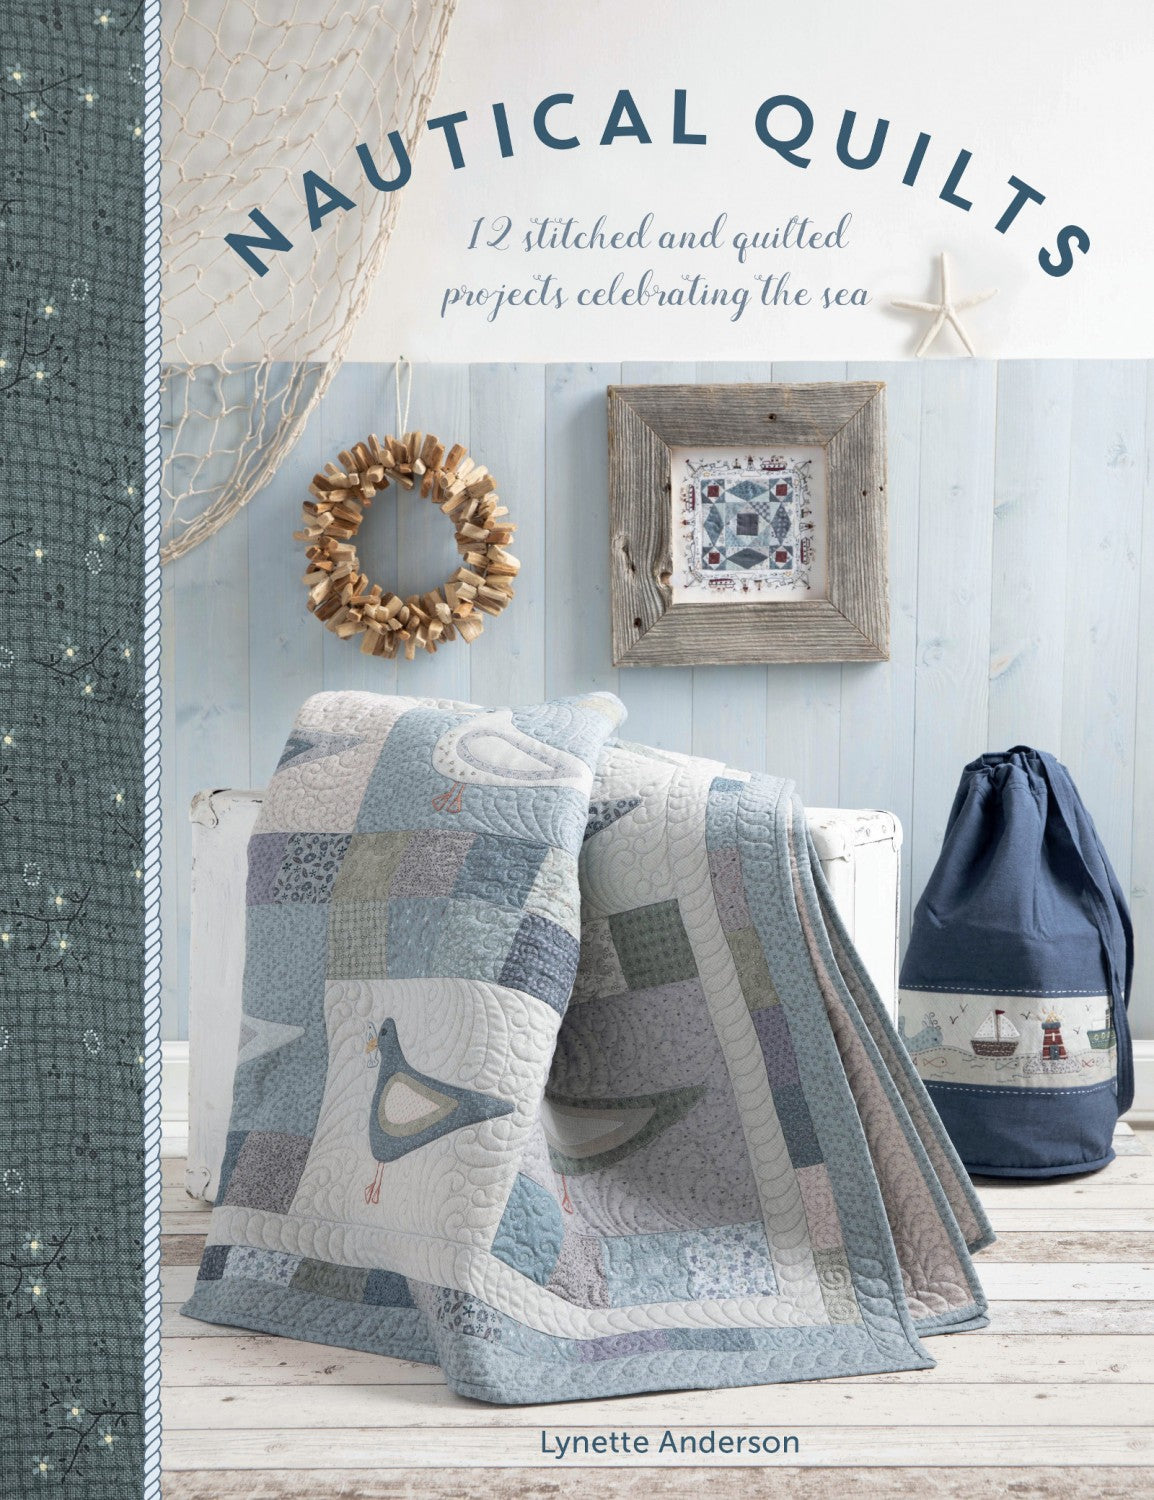 Nautical Quilts by Lynette Anderson